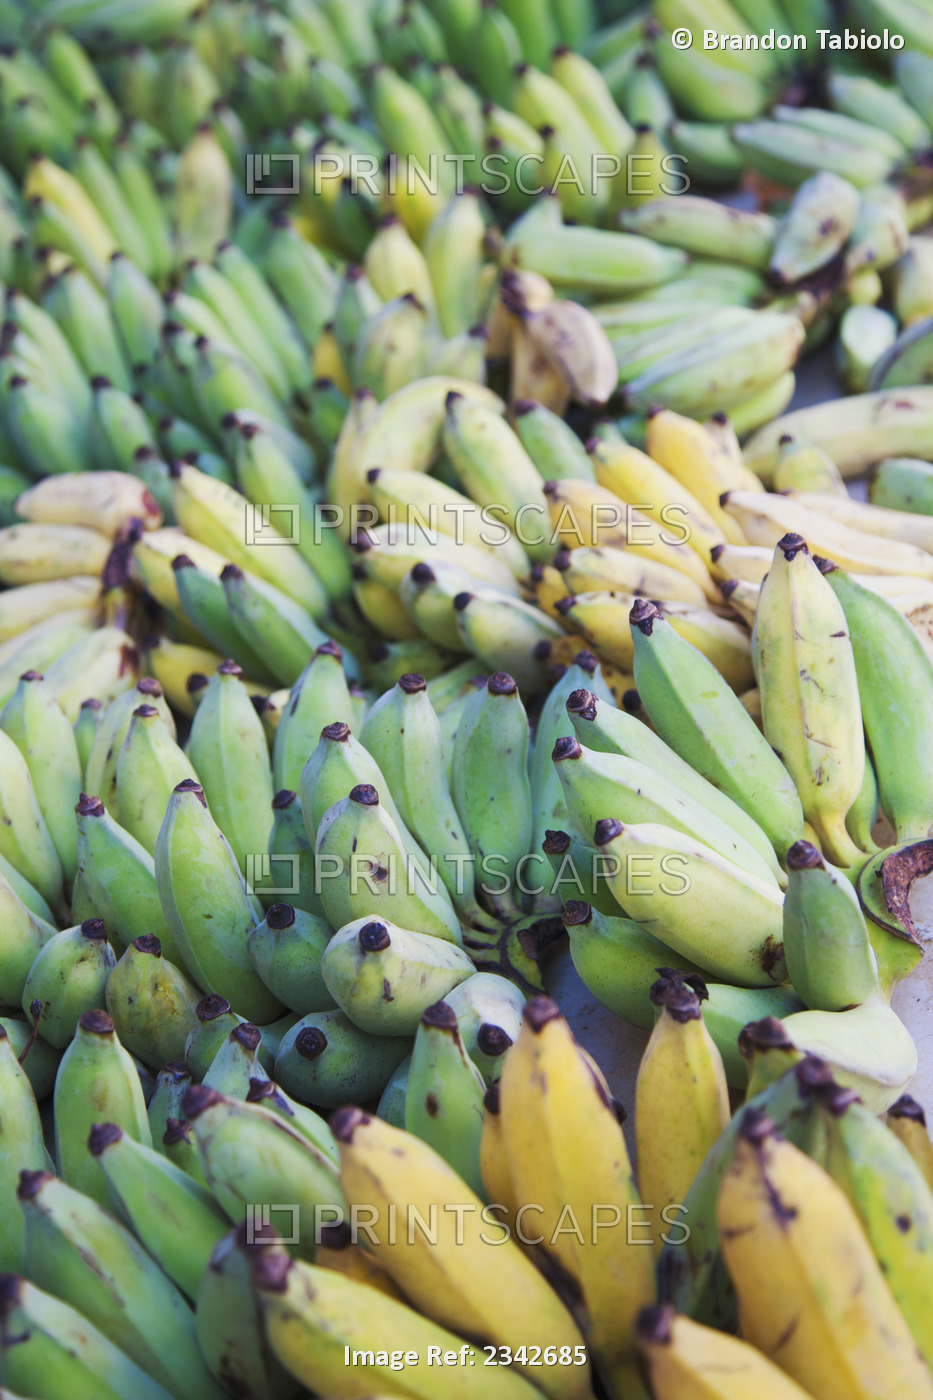 Bunches of apple bananas; Oahu hawaii united states of america